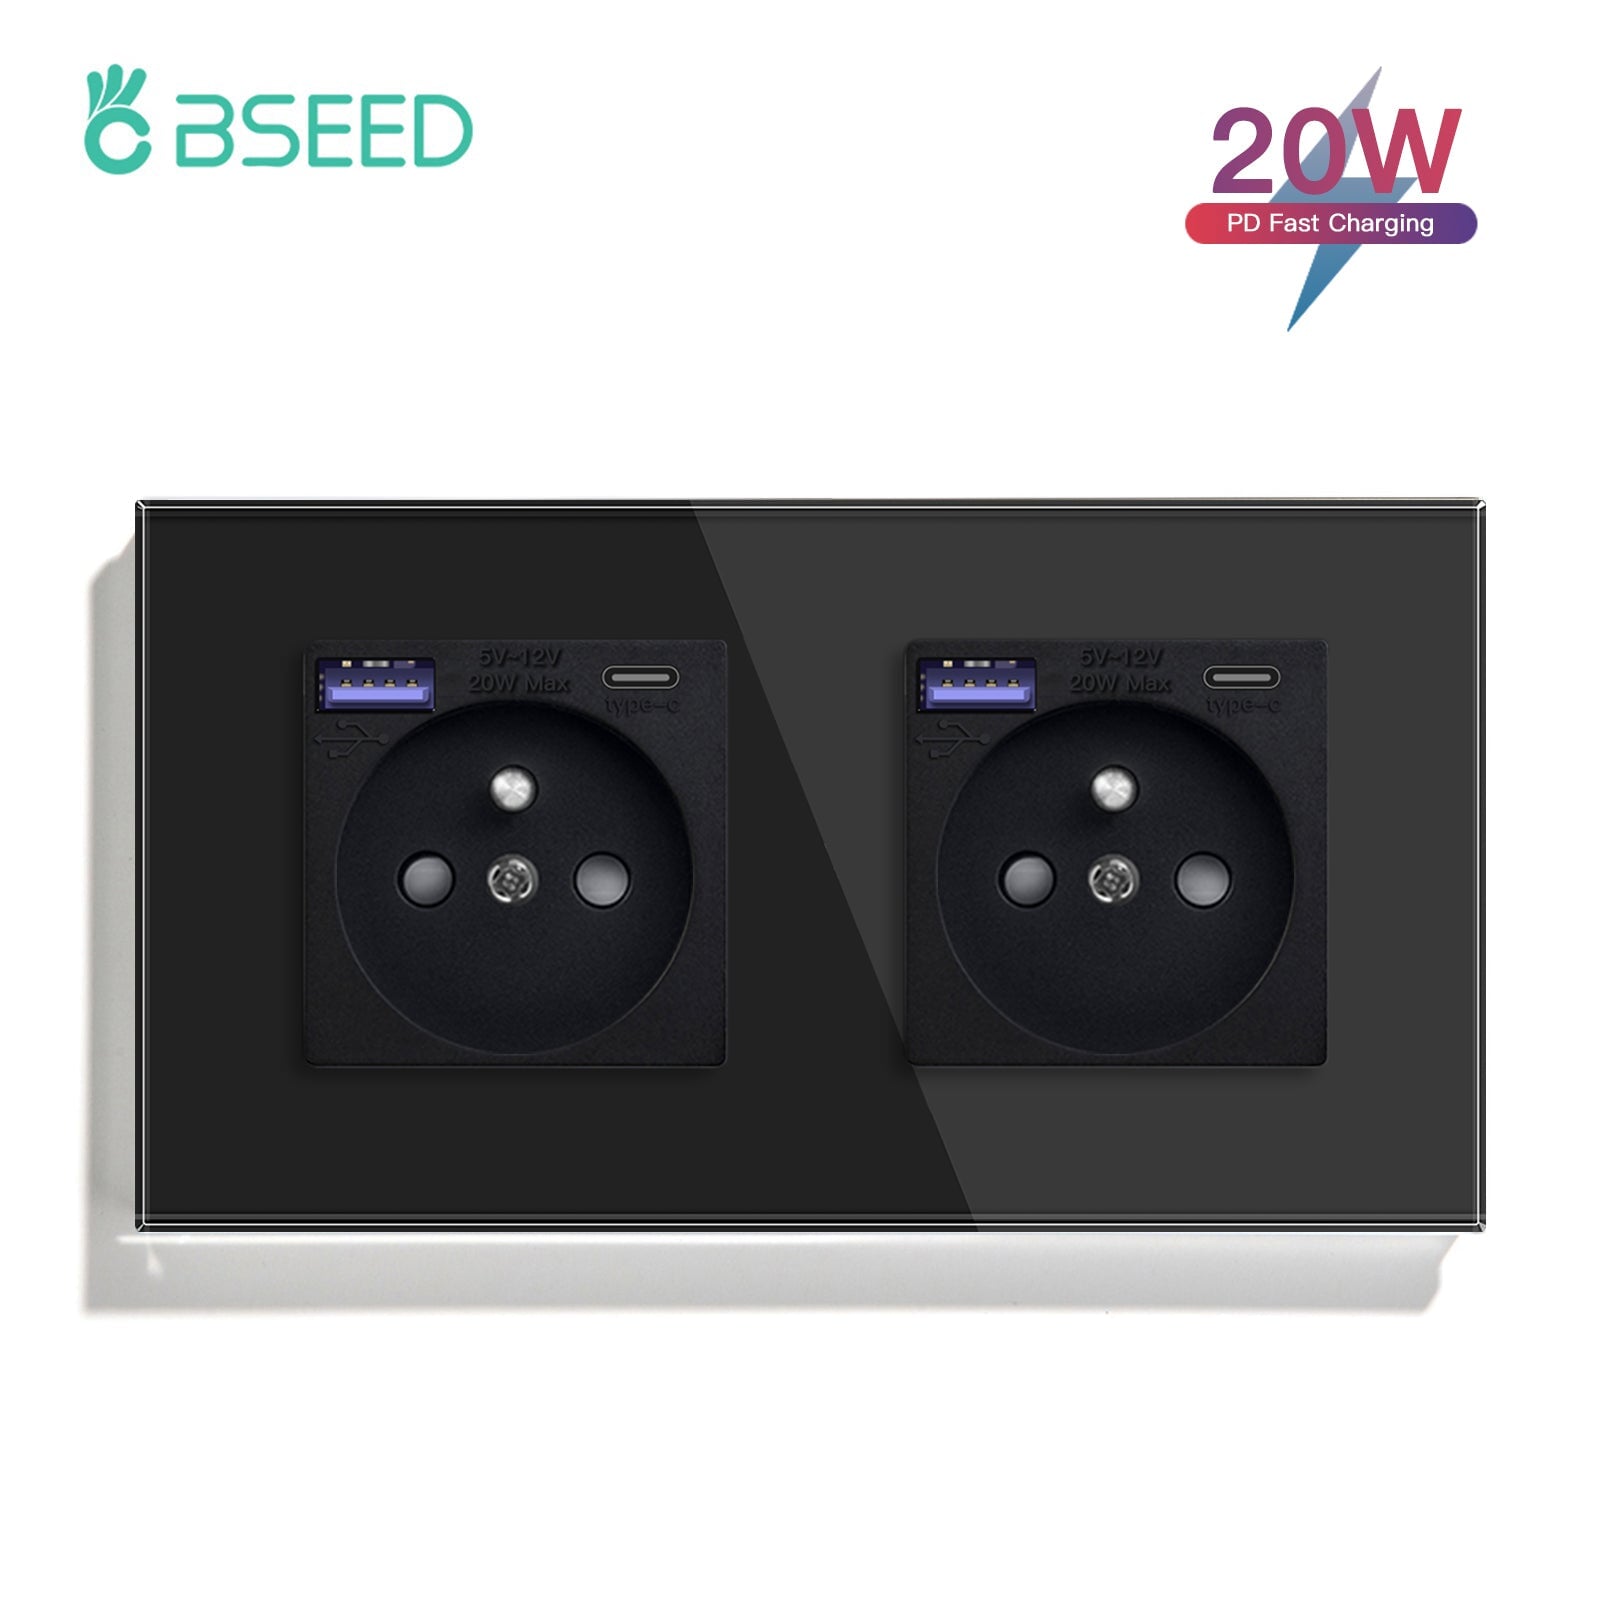 BSEED FR sockets with 20W PD Fast Charge Type-C Interface Outlet Wall Socket Power Outlets & Sockets Bseedswitch Black Double 